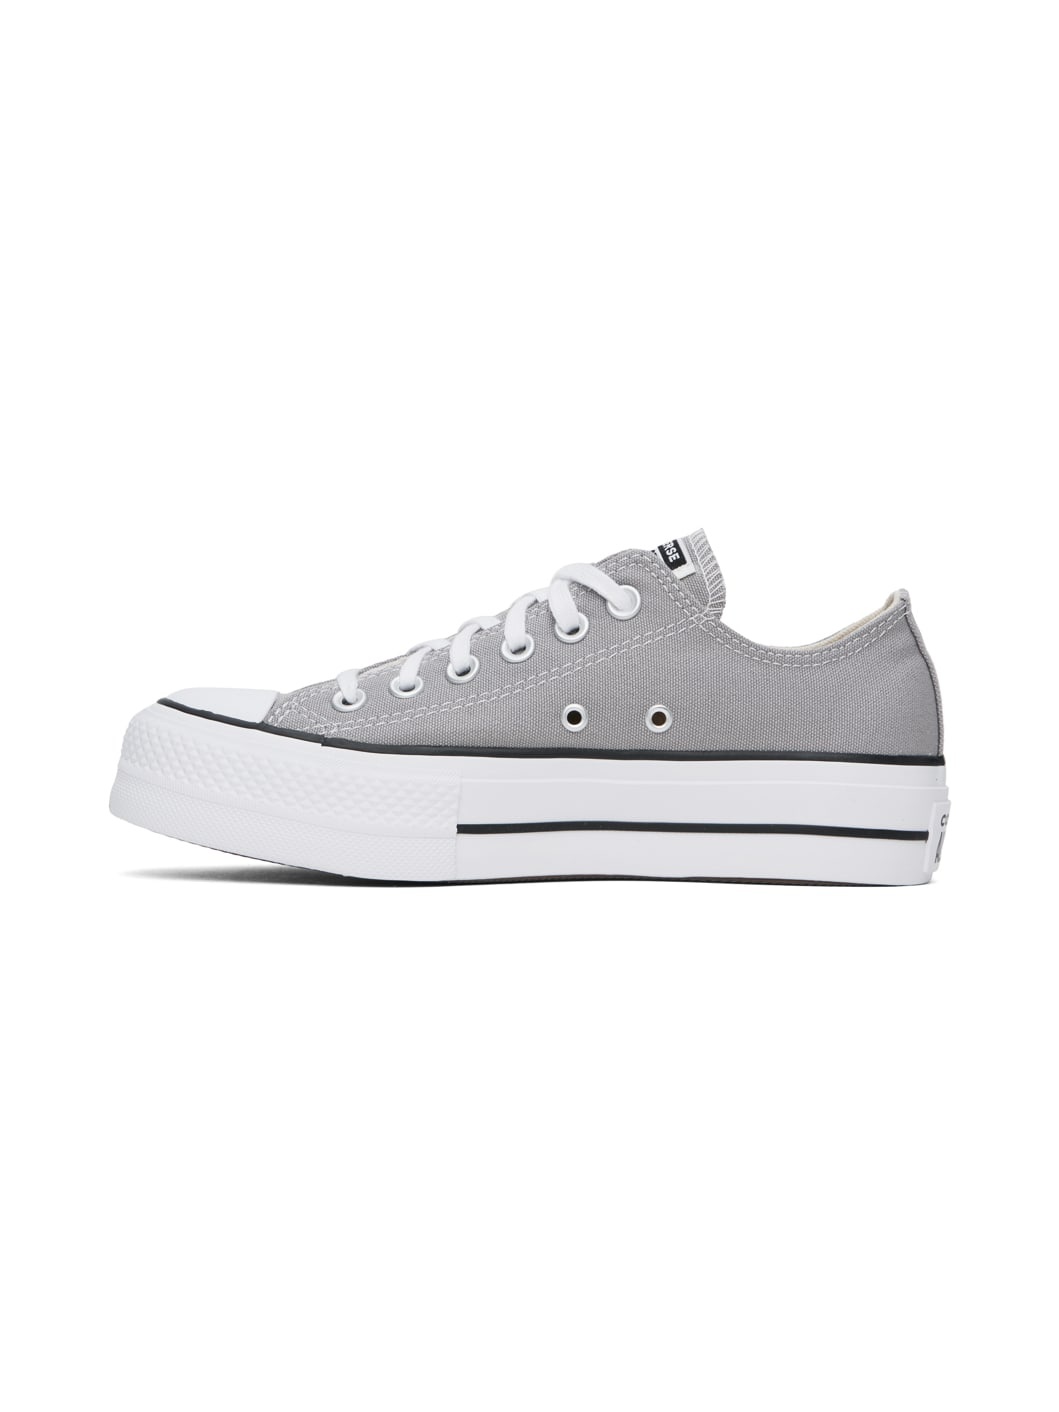 Gray Chuck Taylor All Star Low Top Sneakers - 3